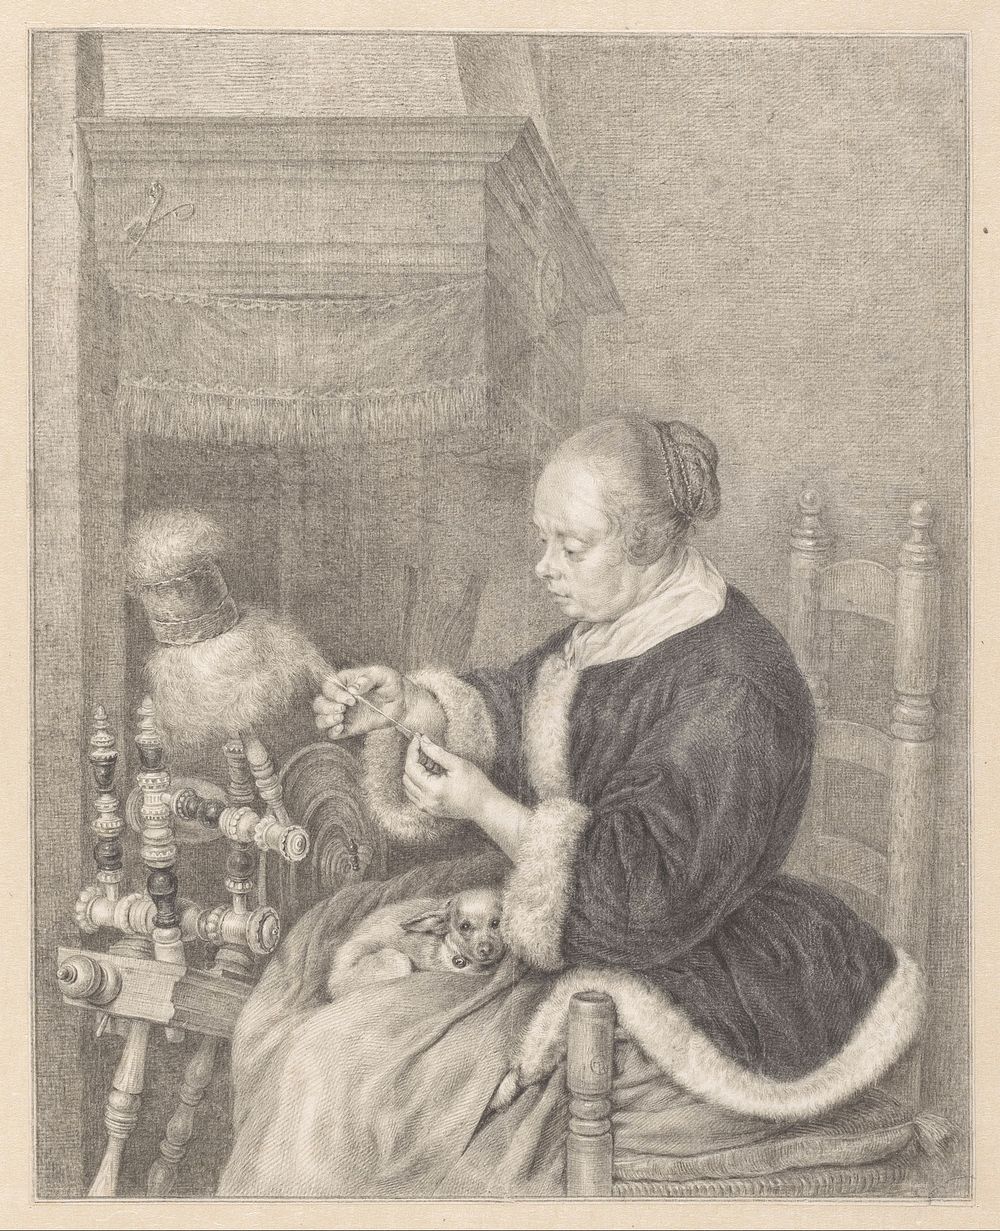 De Spinster (1778) by Abraham Delfos and Gerard ter Borch II